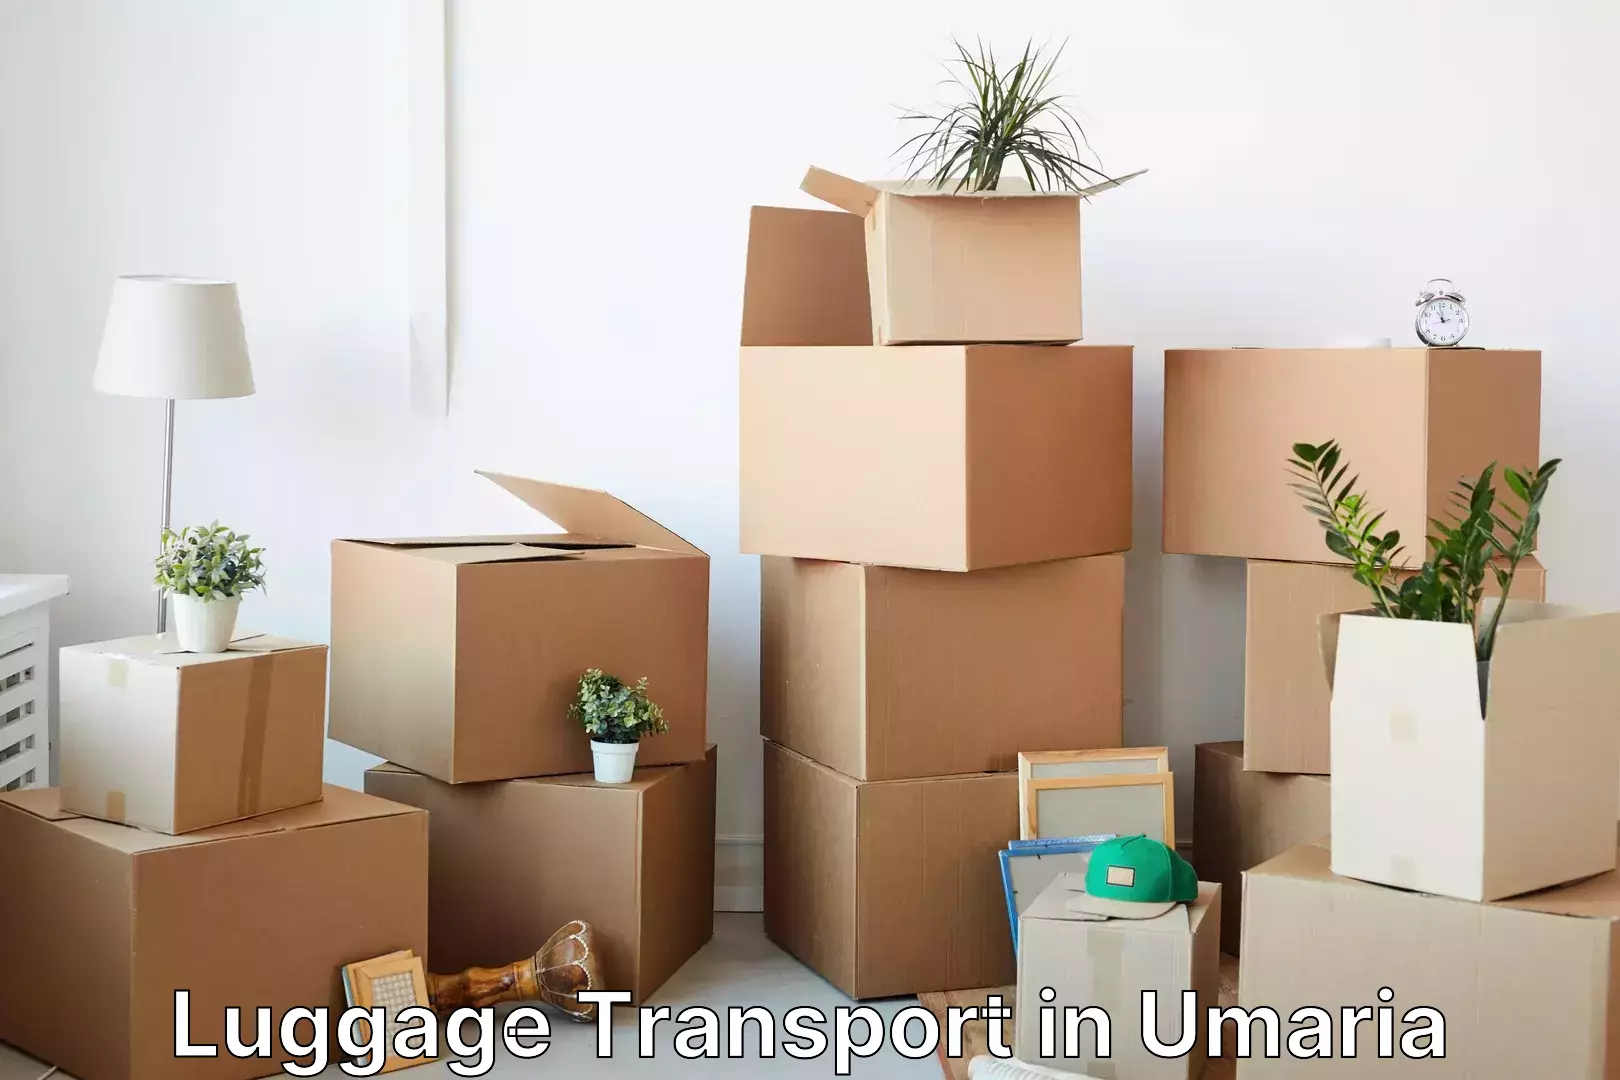 Hassle-free luggage shipping in Umaria